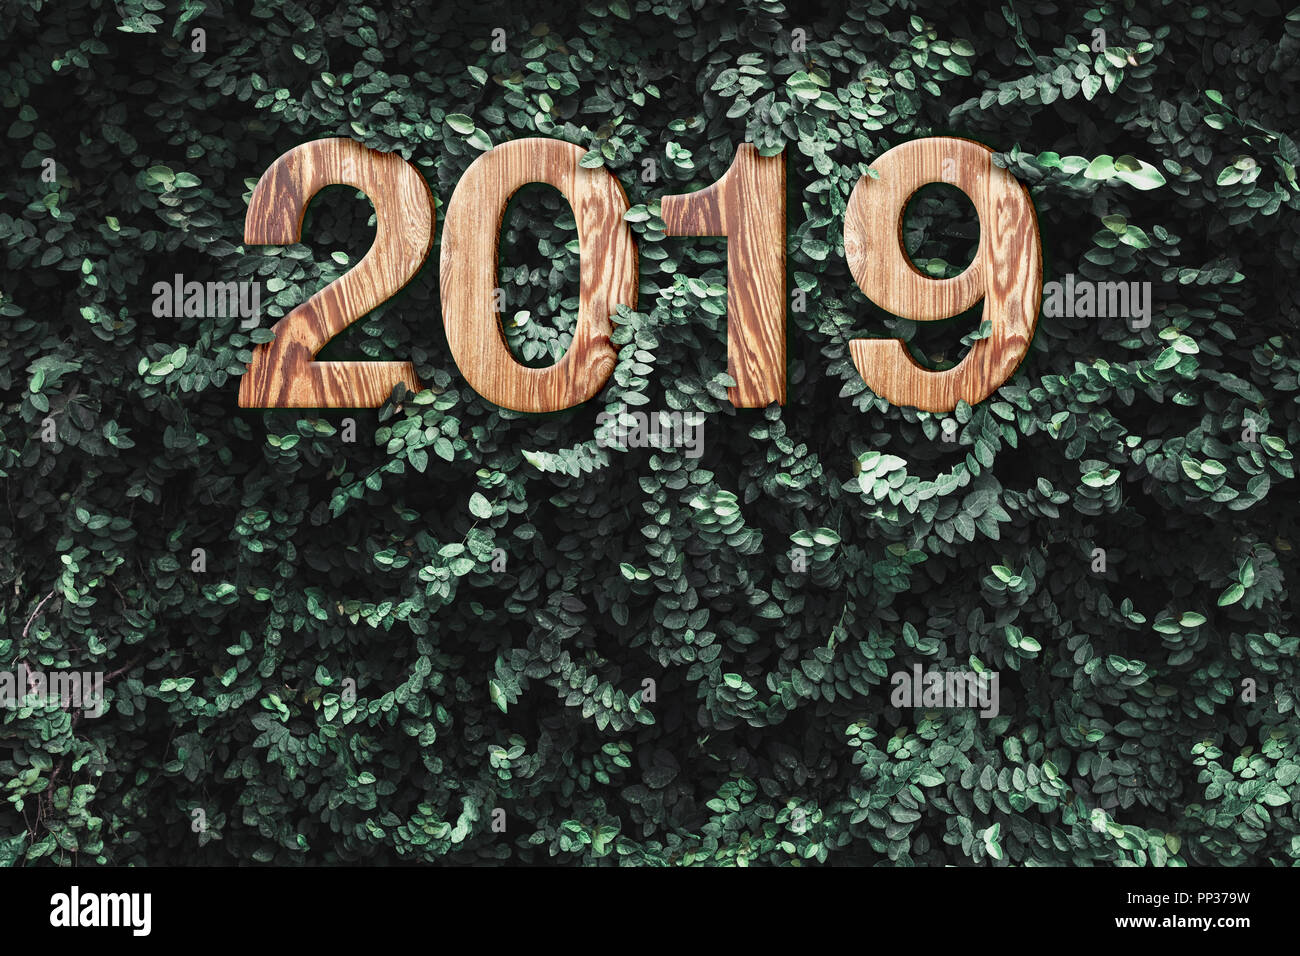 2019 Happy New Year Wood Texture Number On Green Leaves Wall